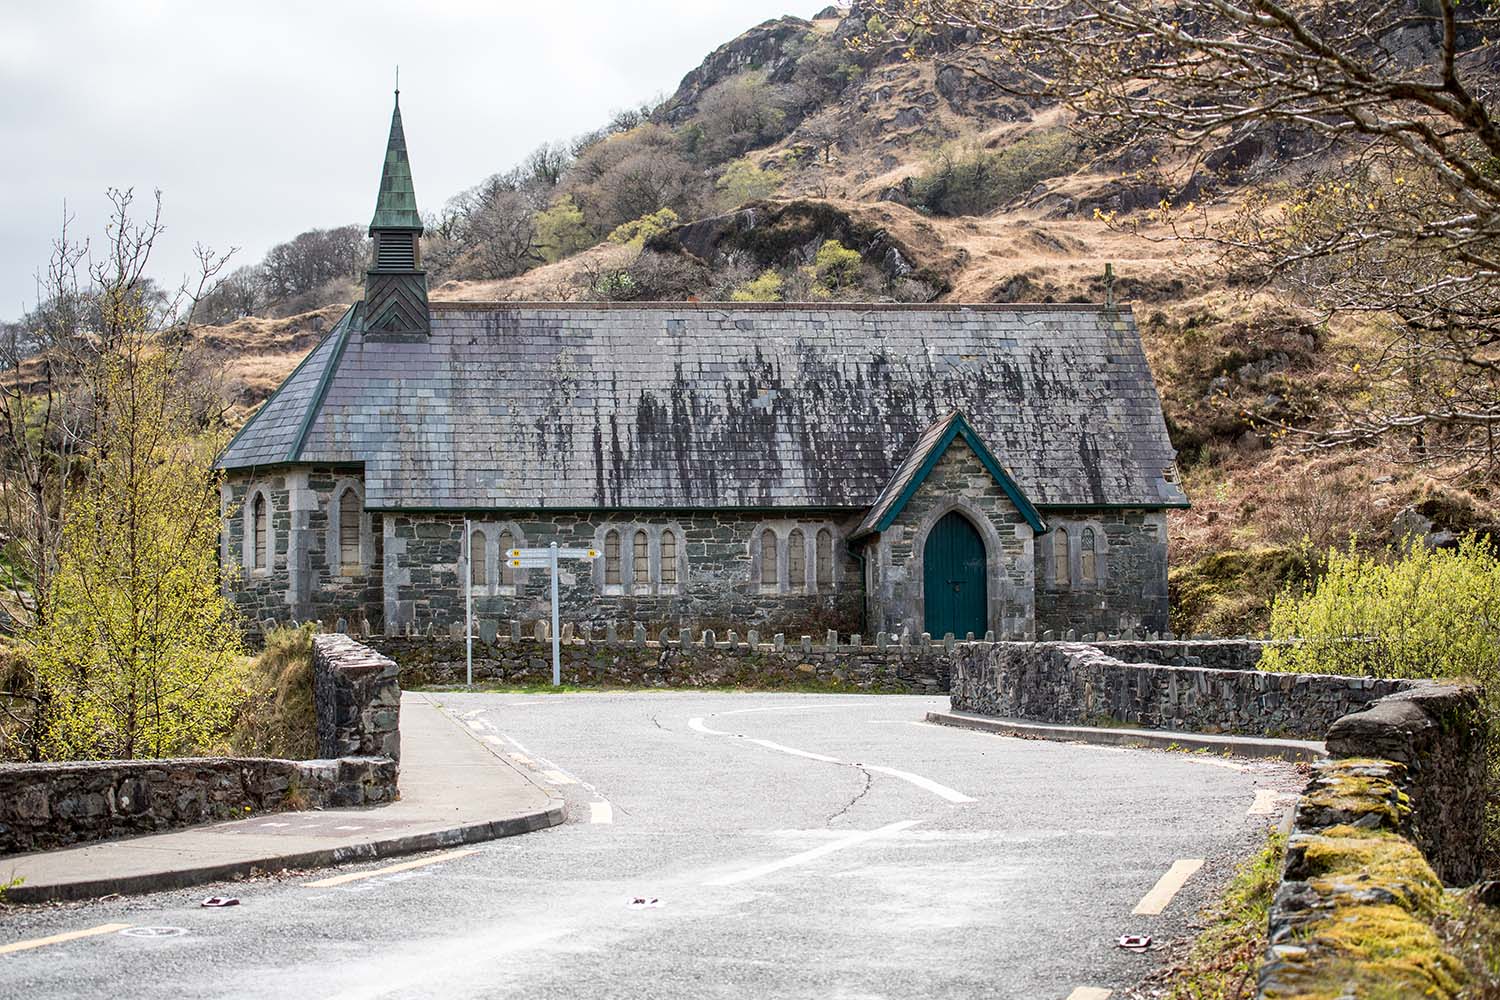 Abandoned Derrycunihy Church at Ladies View in Killarney National Park, Ireland